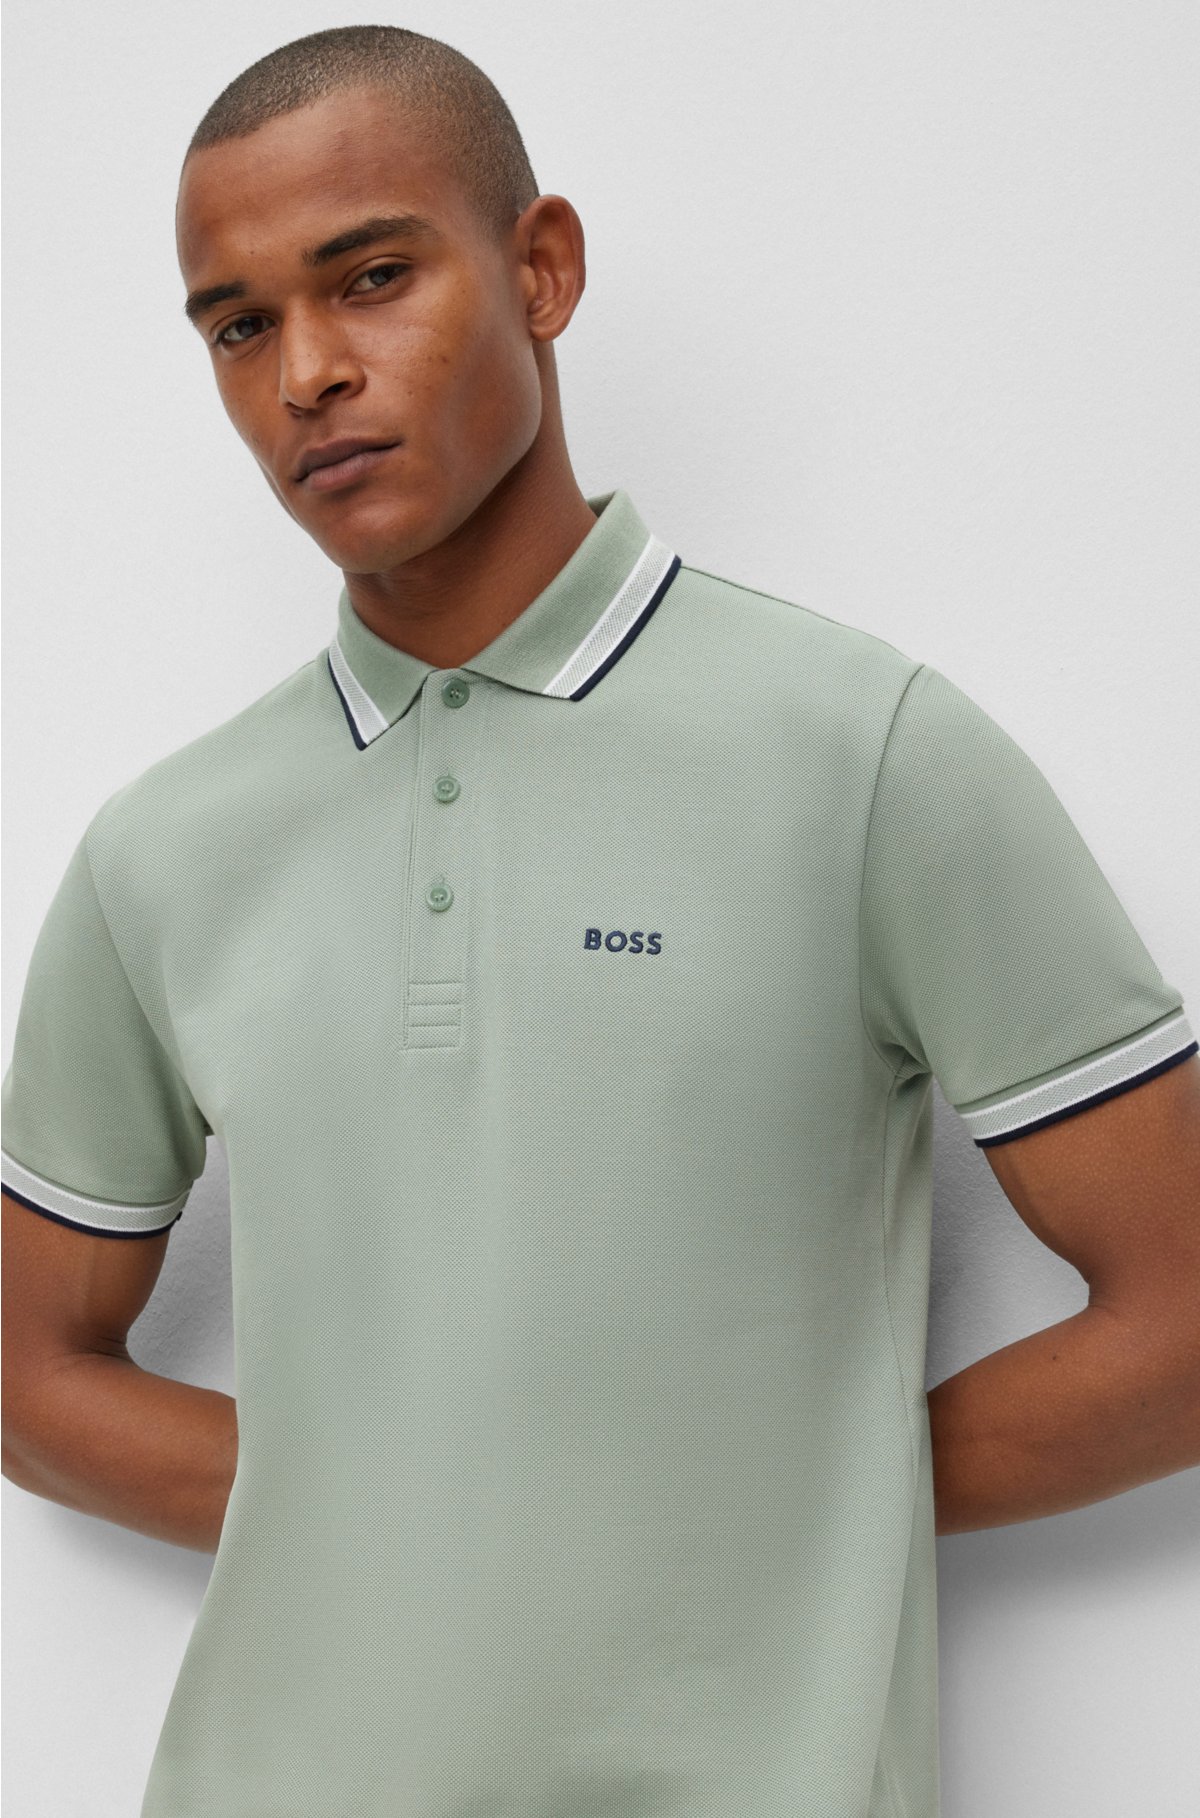 Short sleeve piqué polo shirt in a regular fit made from organic